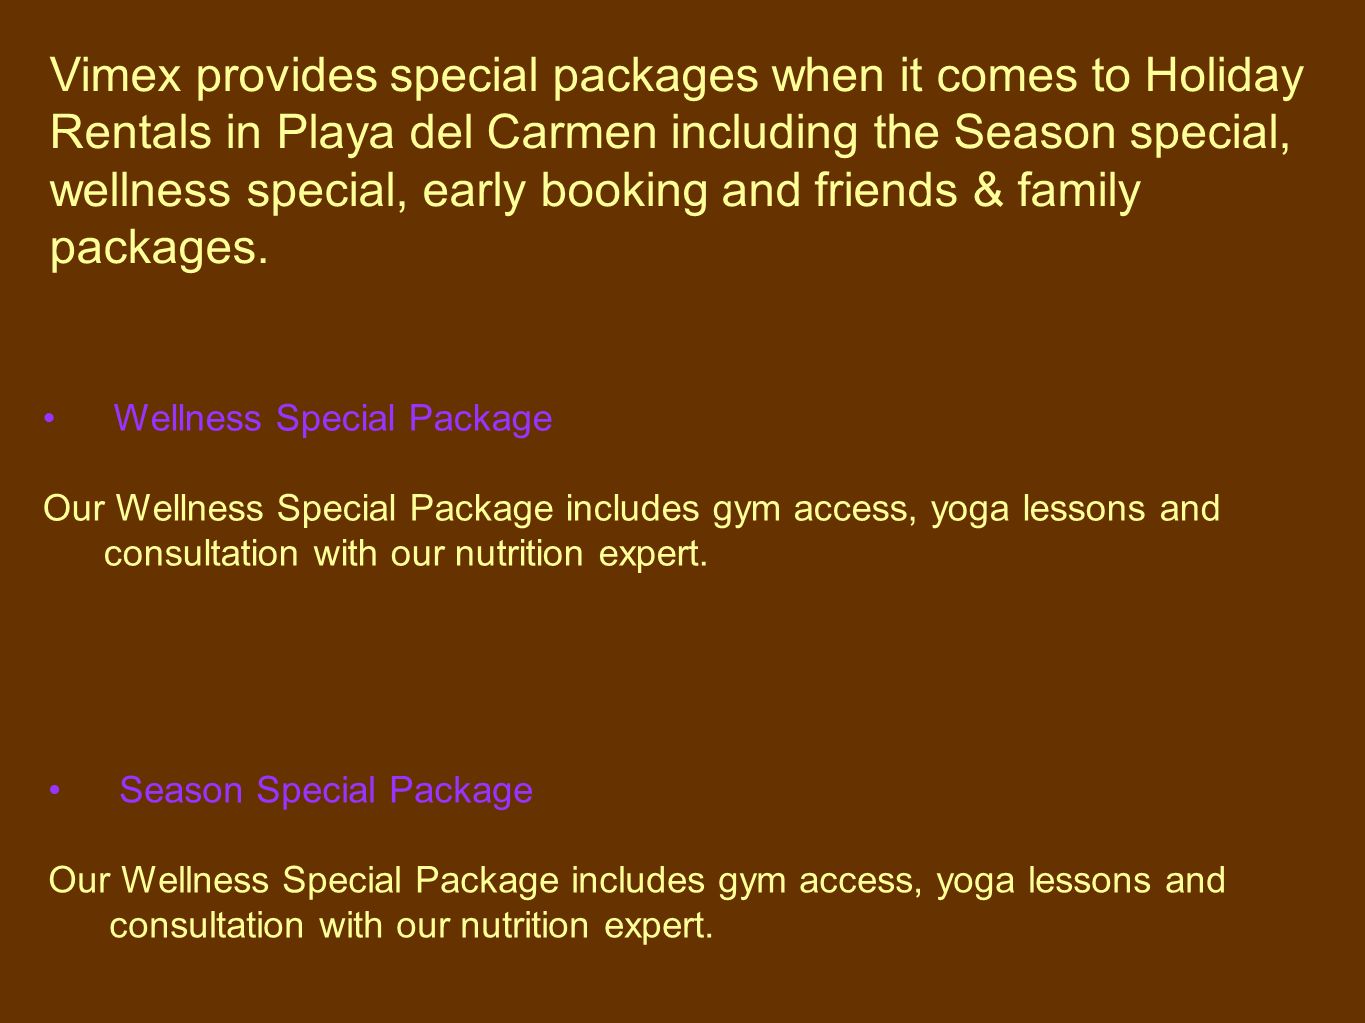 Vimex provides special packages when it comes to Holiday Rentals in Playa del Carmen including the Season special, wellness special, early booking and friends & family packages.